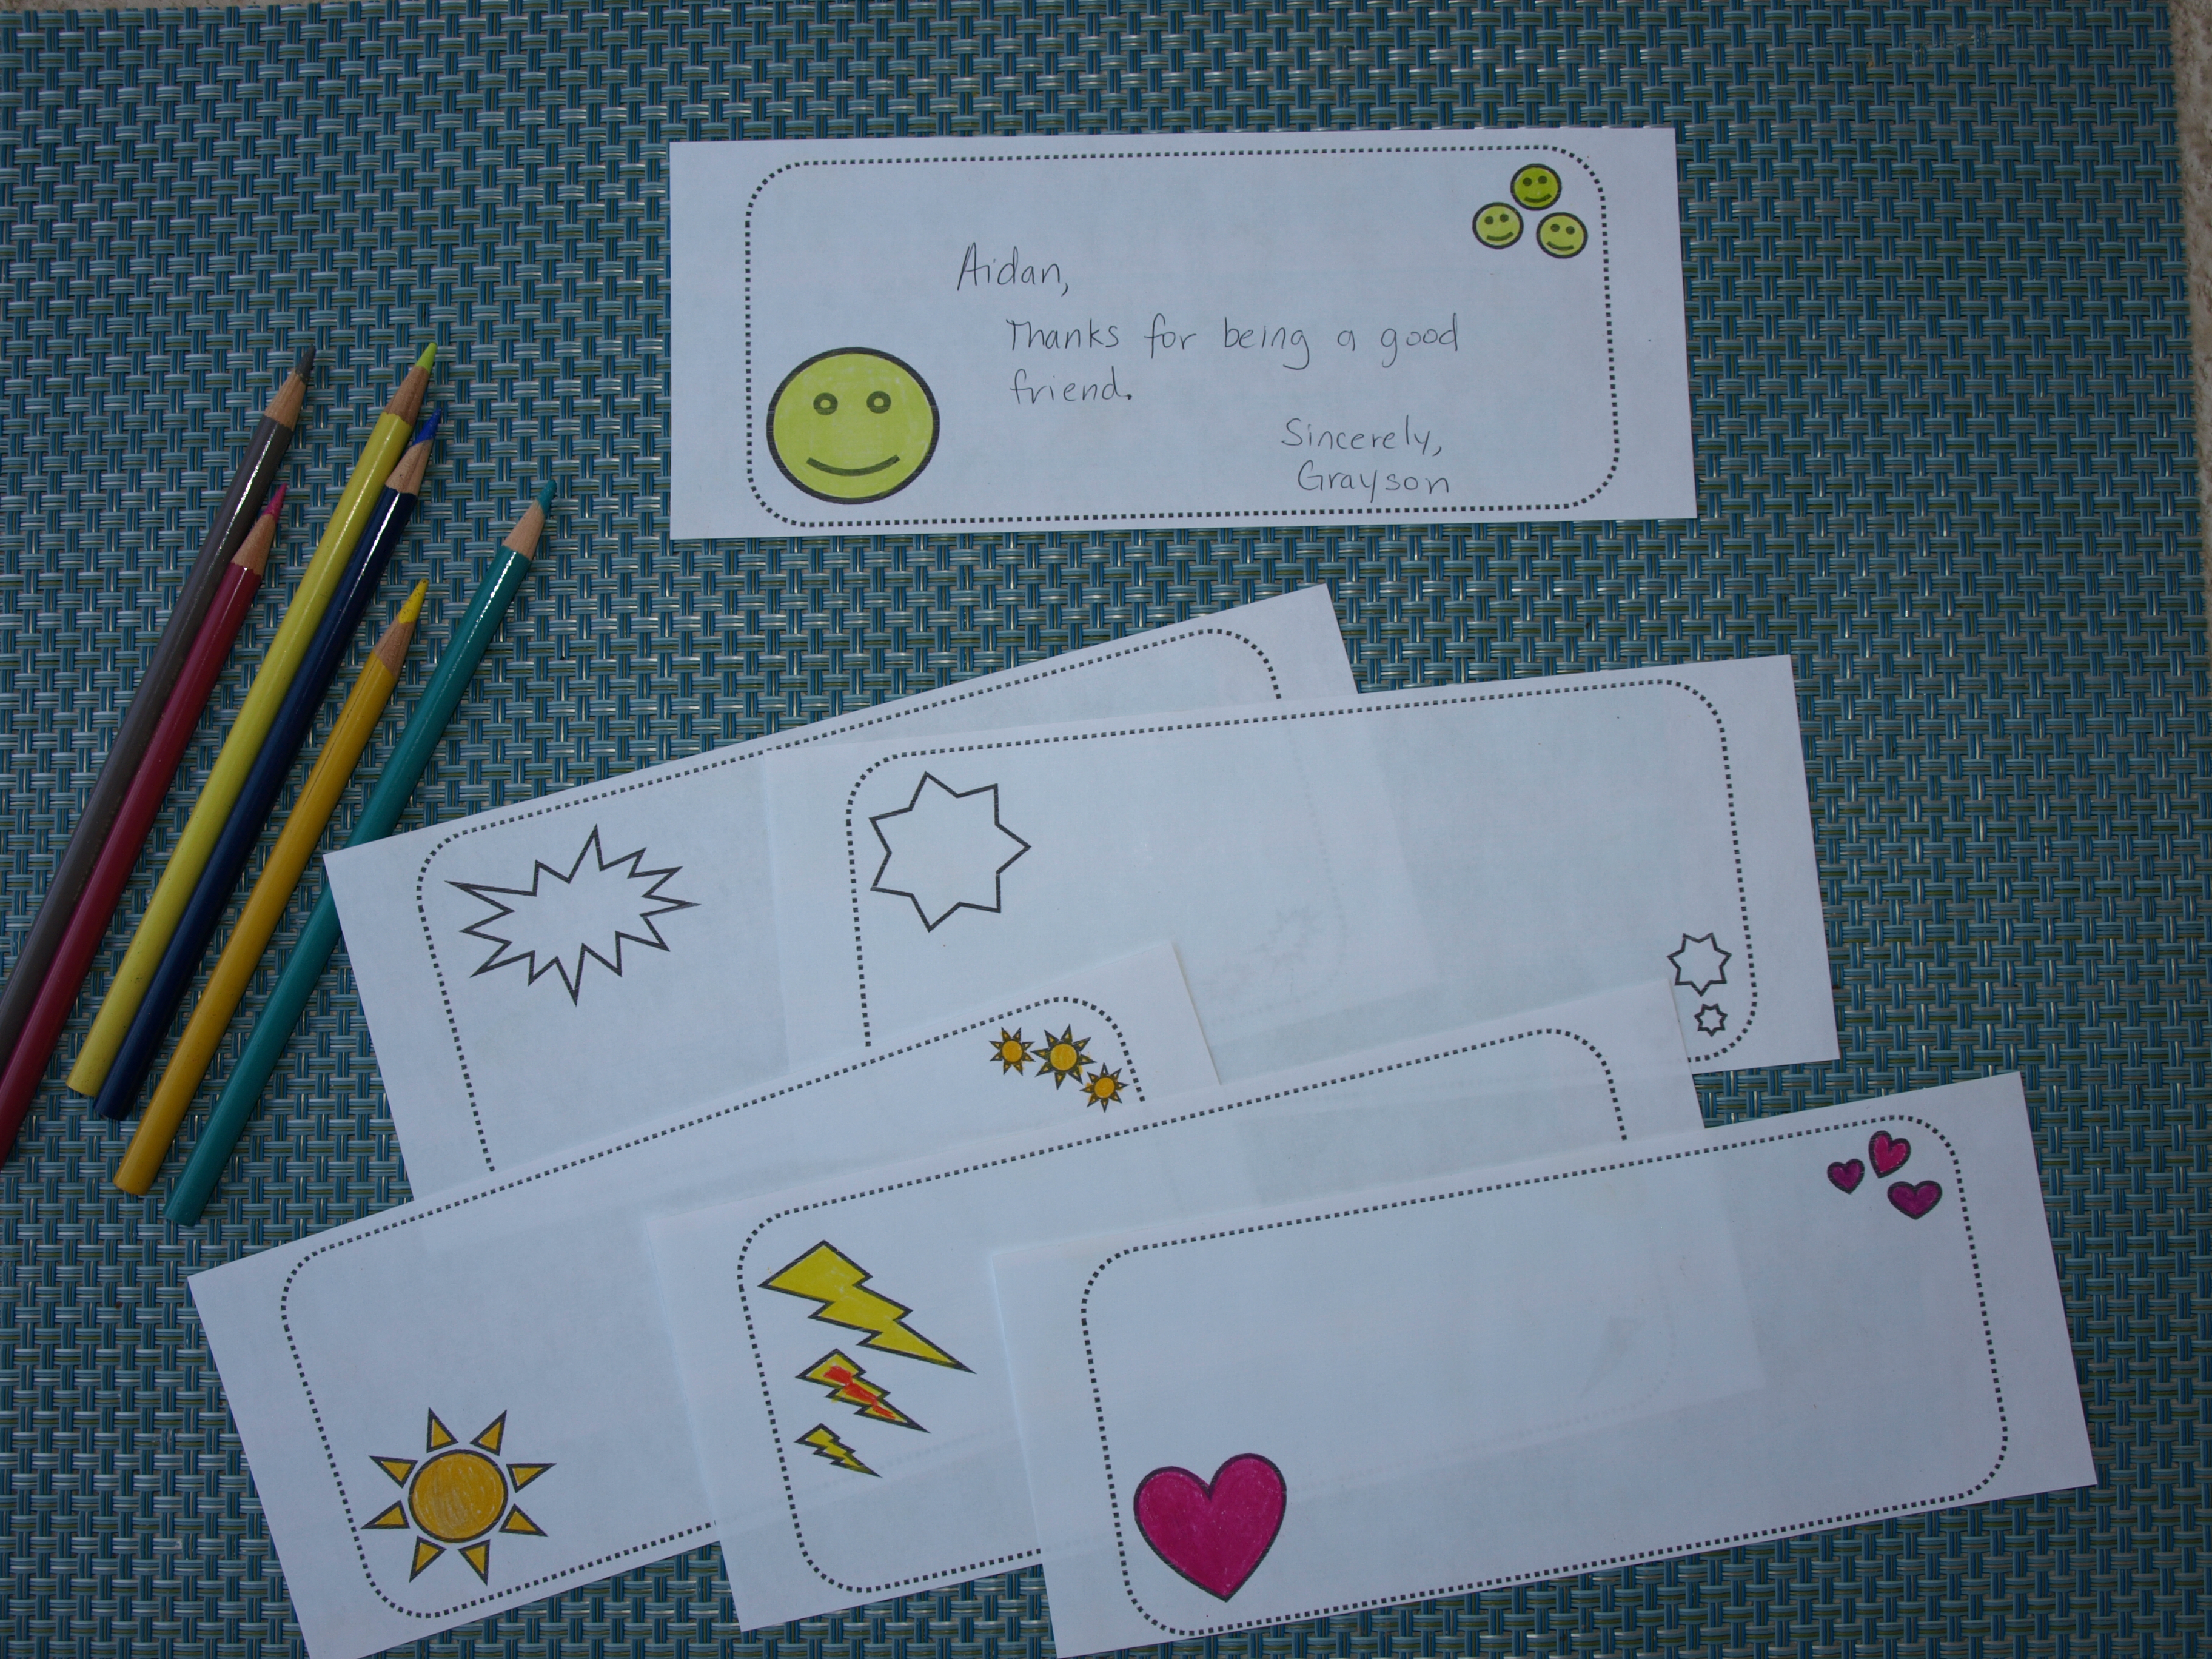 Scrapbook slips to use for writing notes or compliments